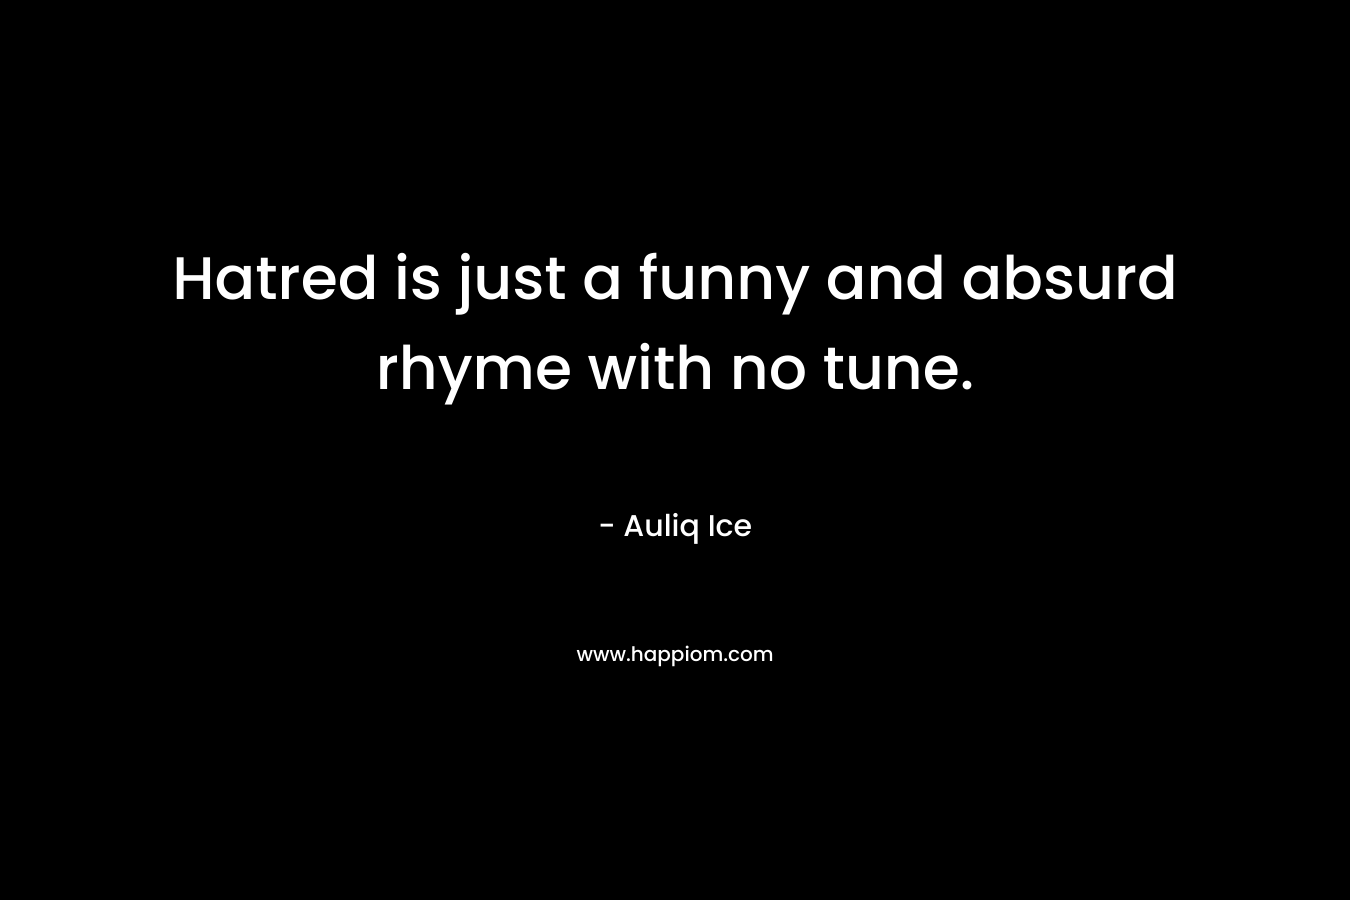 Hatred is just a funny and absurd rhyme with no tune. – Auliq Ice